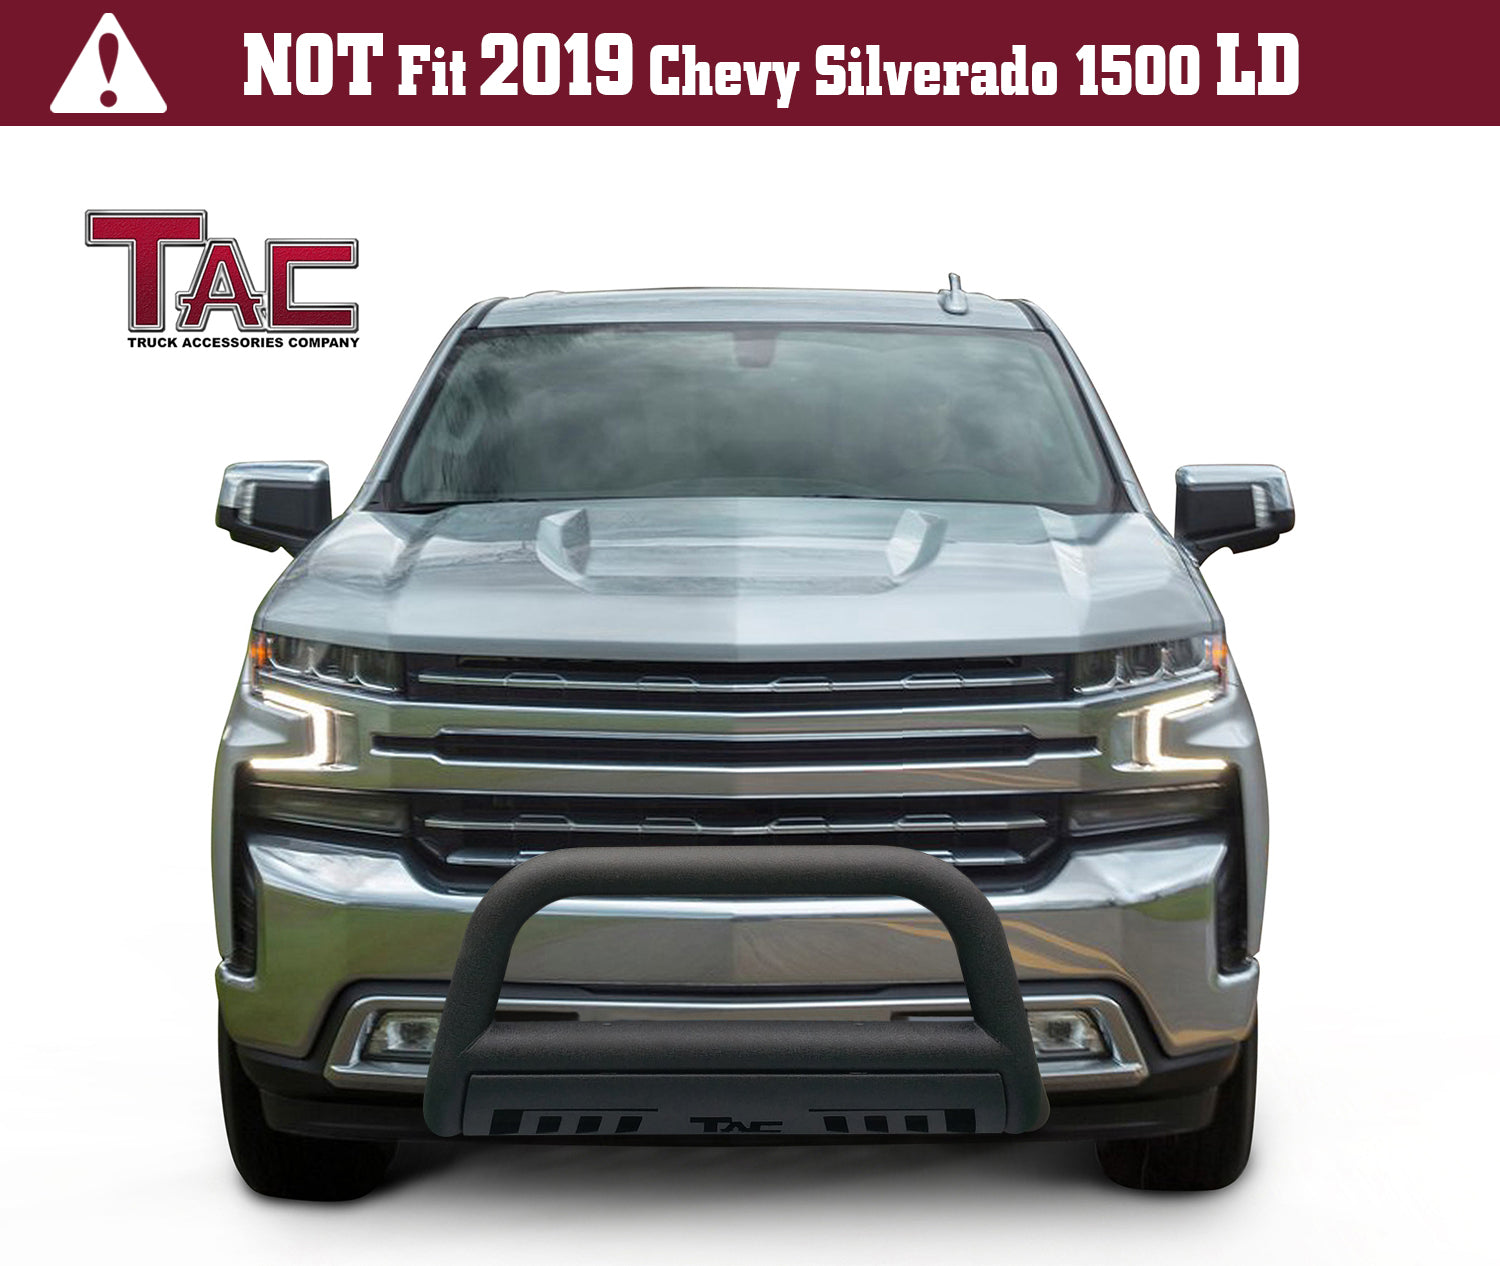 TAC Heavy Texture Black 3" Bull Bar For 2019-2024 Chevy Silverado 1500 Excl. 2019-2021 Silverado 1500 LD / Trims with Super Cruise System ) Pickup Truck Front Bumper Brush Grille Guard Nudge Bar - 0